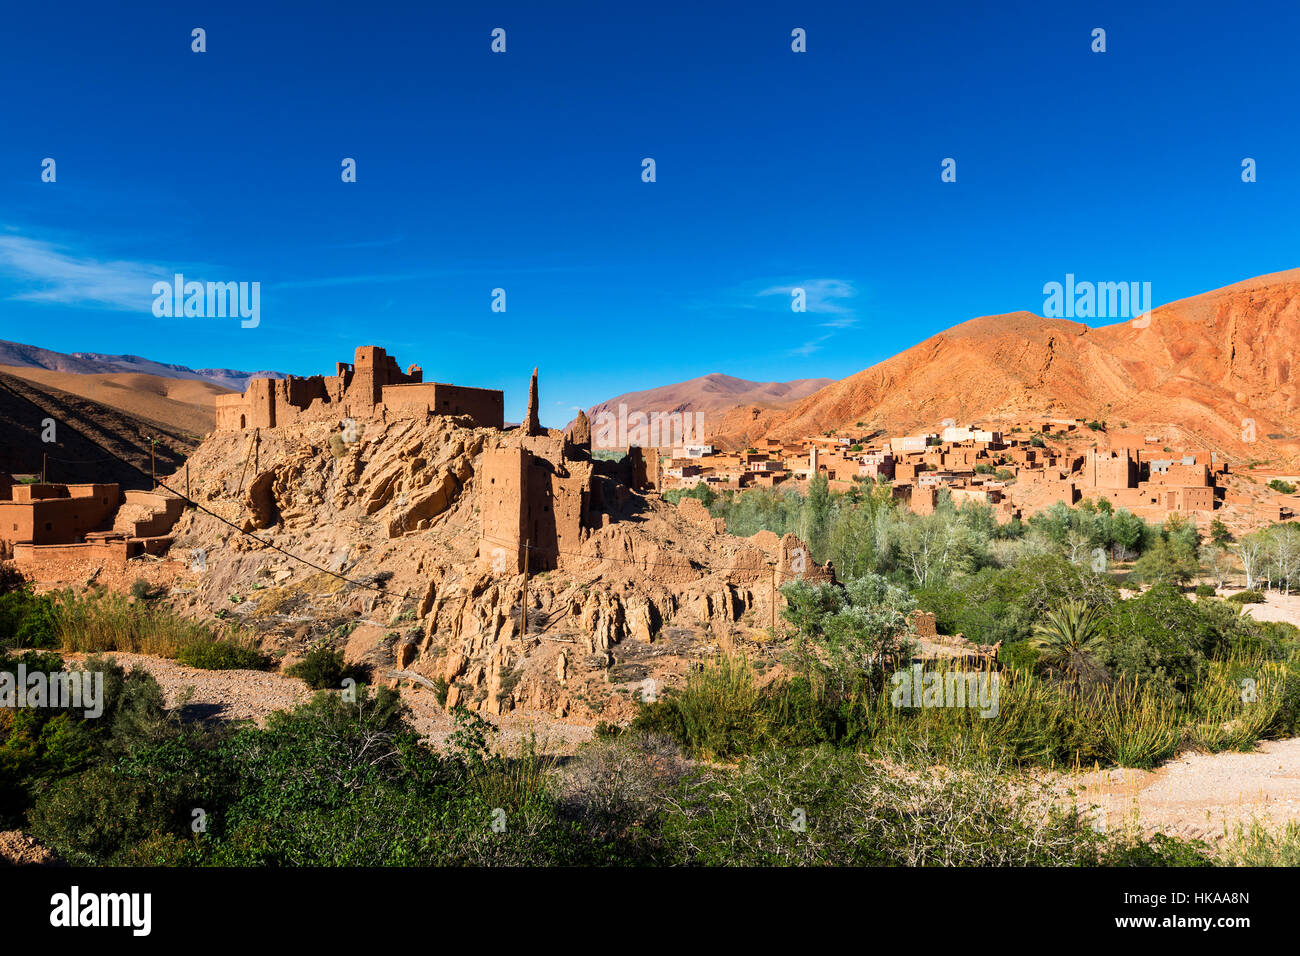 View of the Ait Ali Kasbah and village in the Dades Gorge, Morocco Stock Photo